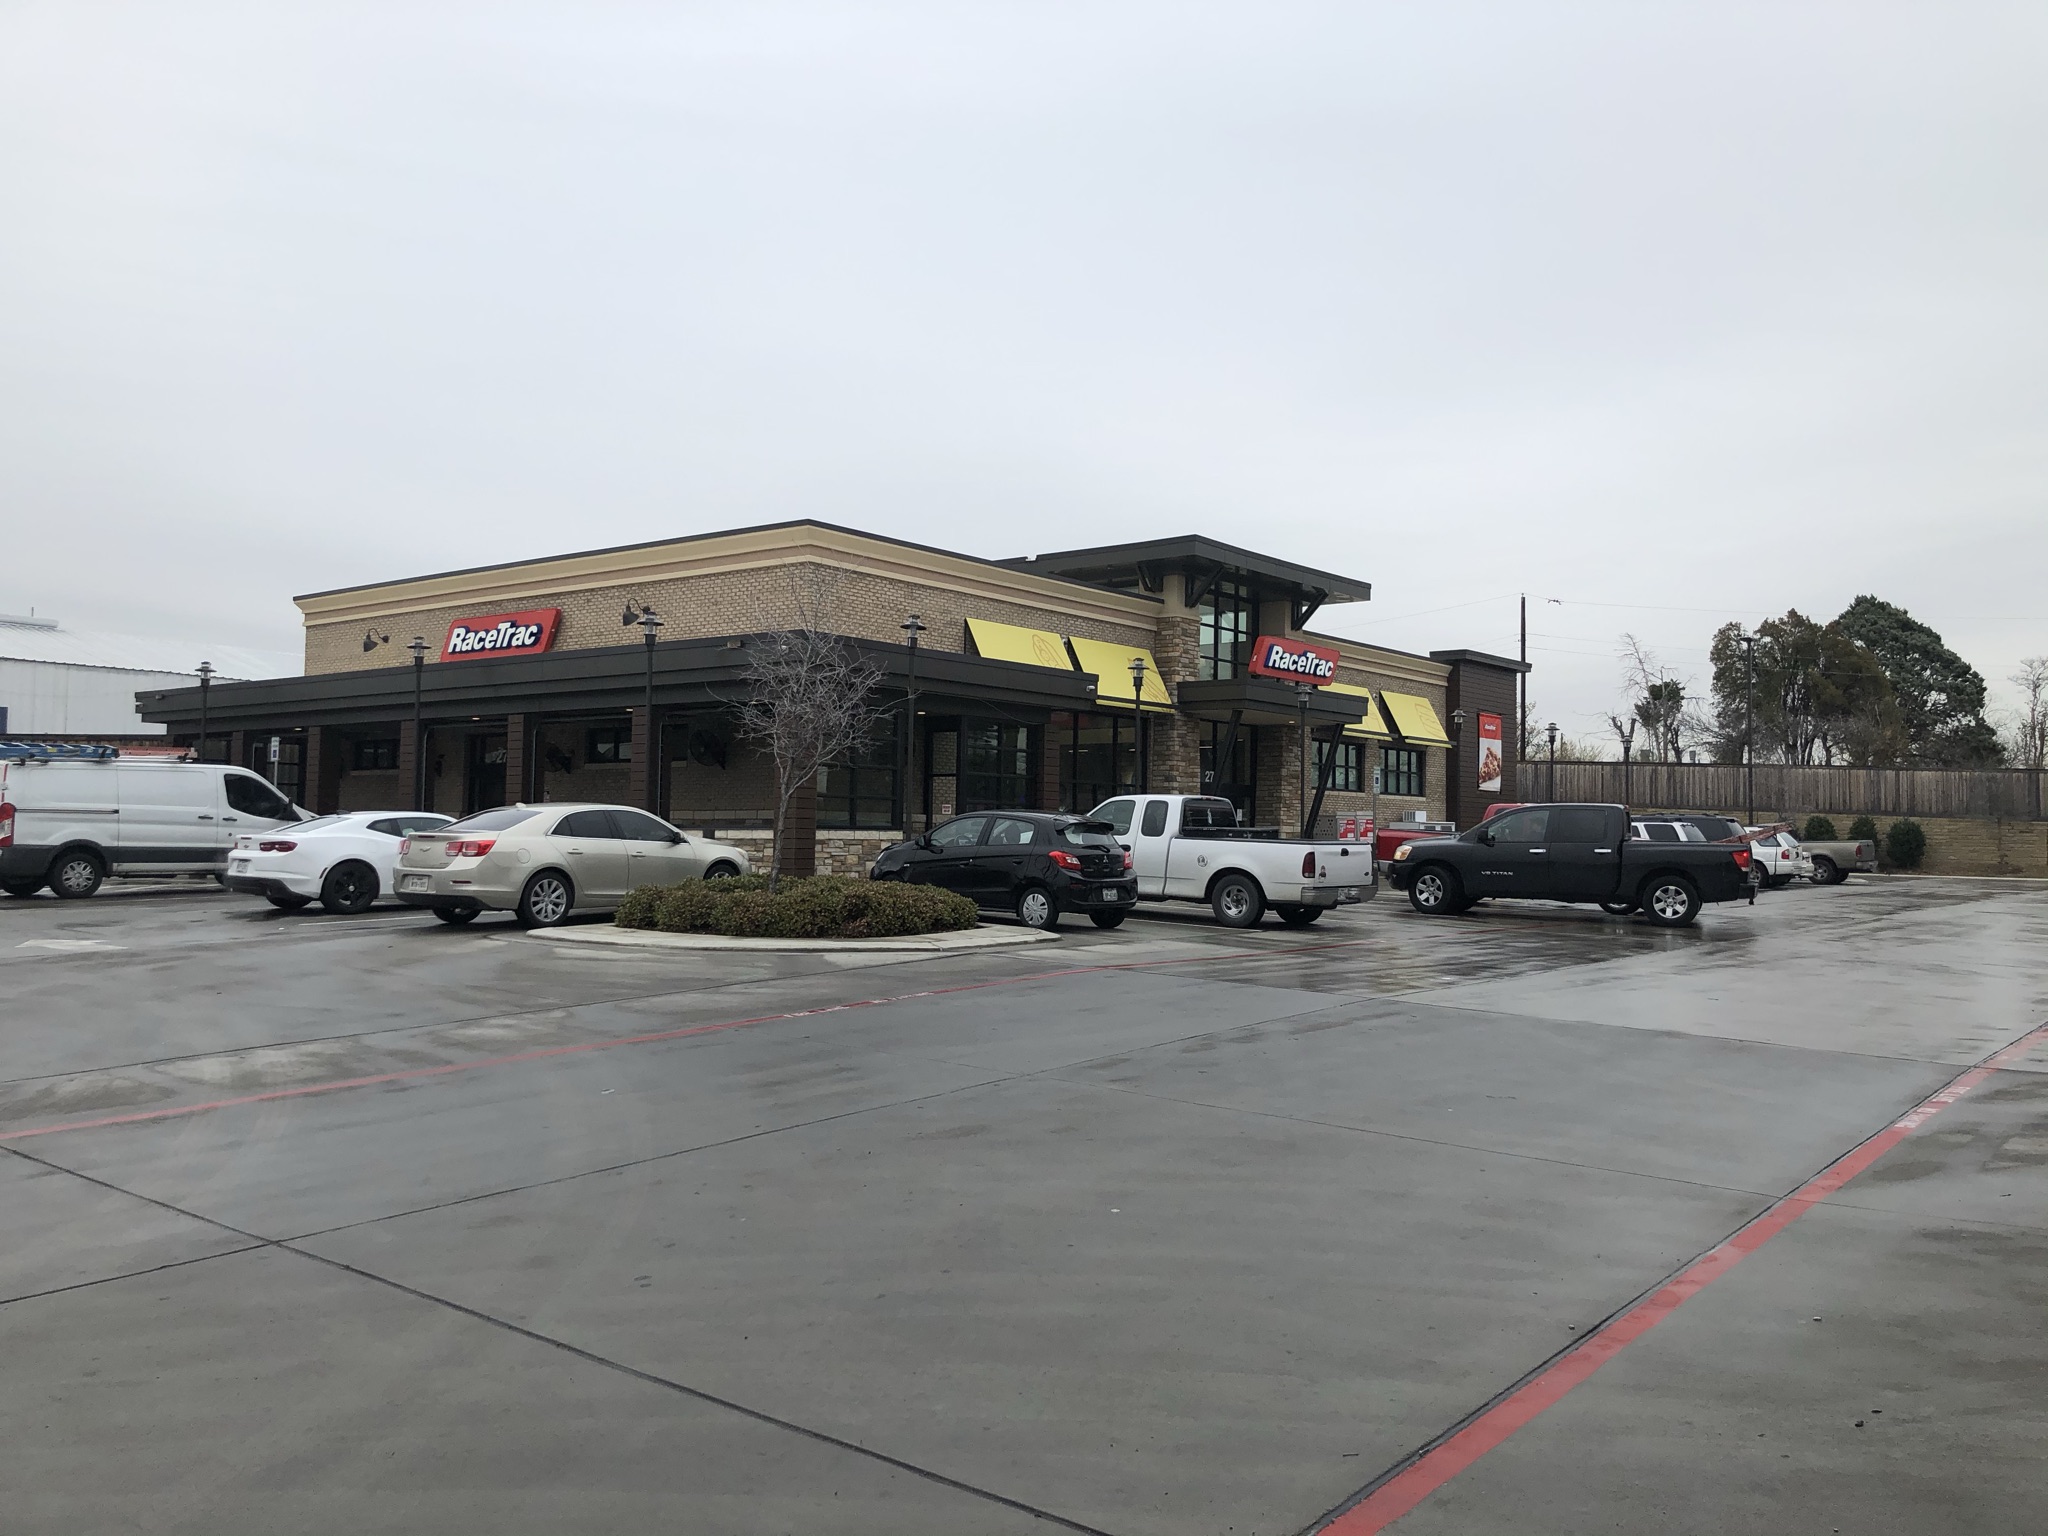 Available property at RaceTrac Store Exterior